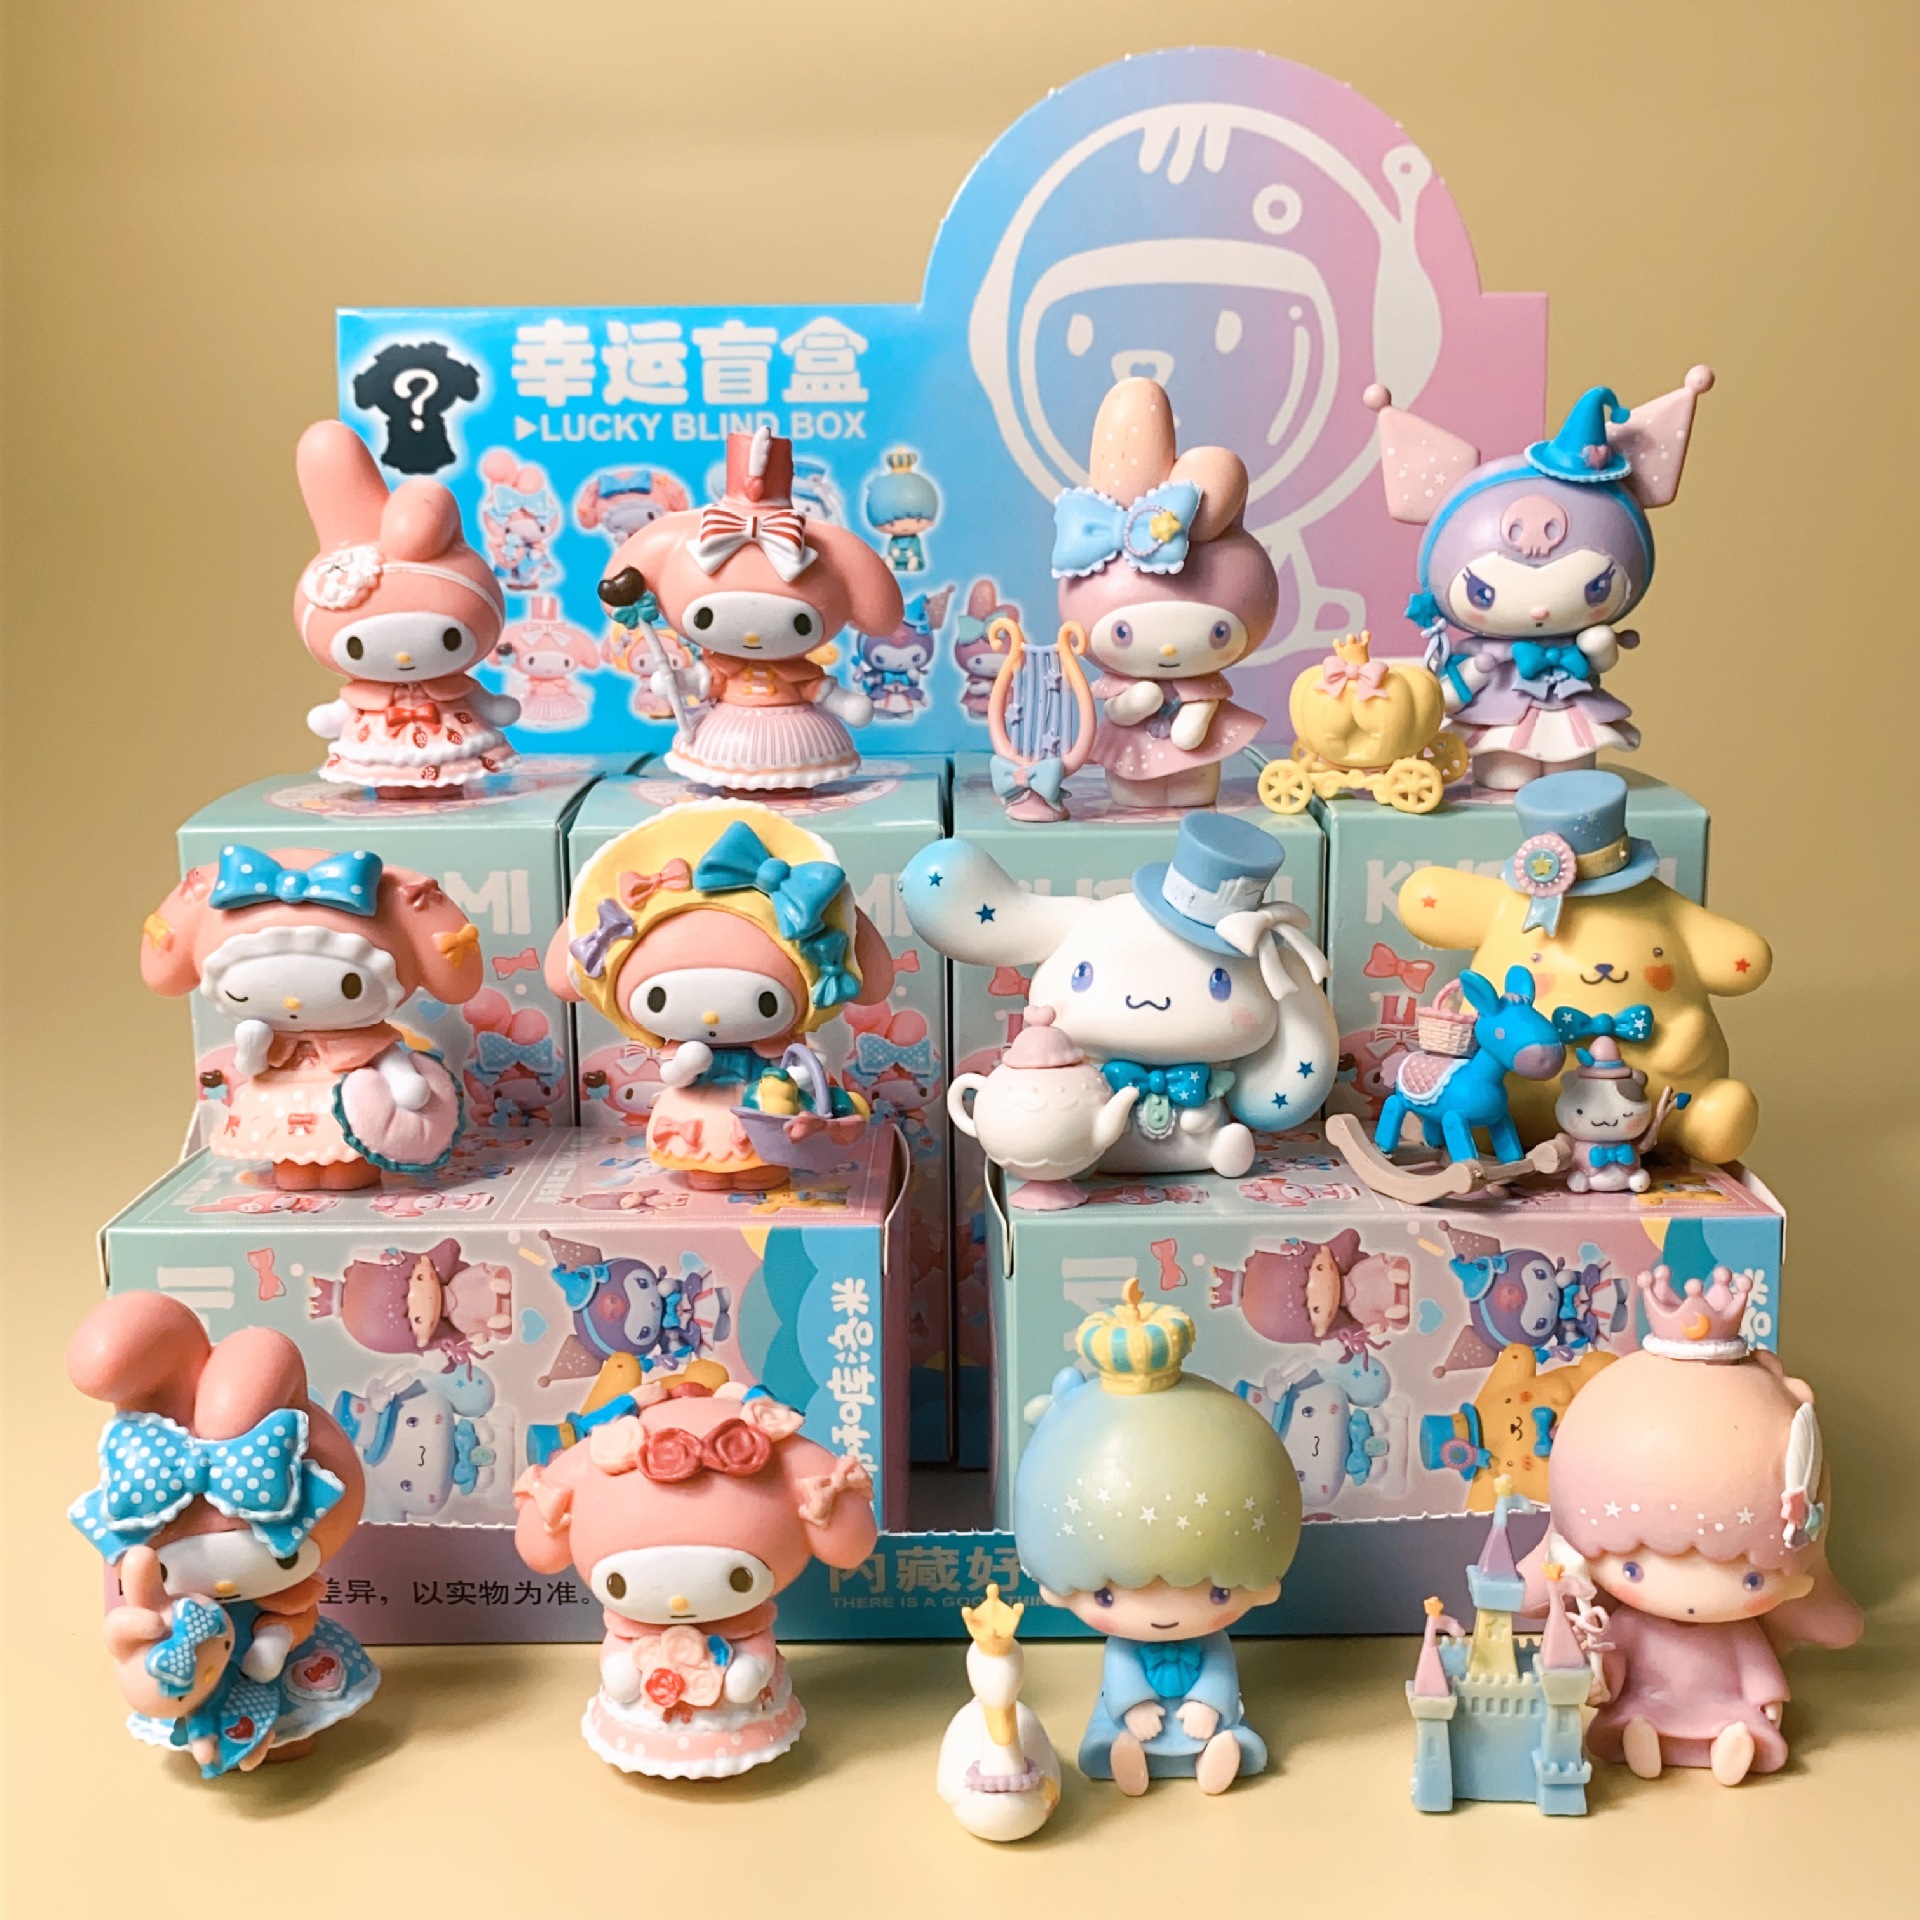 Sanrio Blind Box Clow M Melody Hand-Made Tea Party Dream Series Room Ornaments Birthday Gift